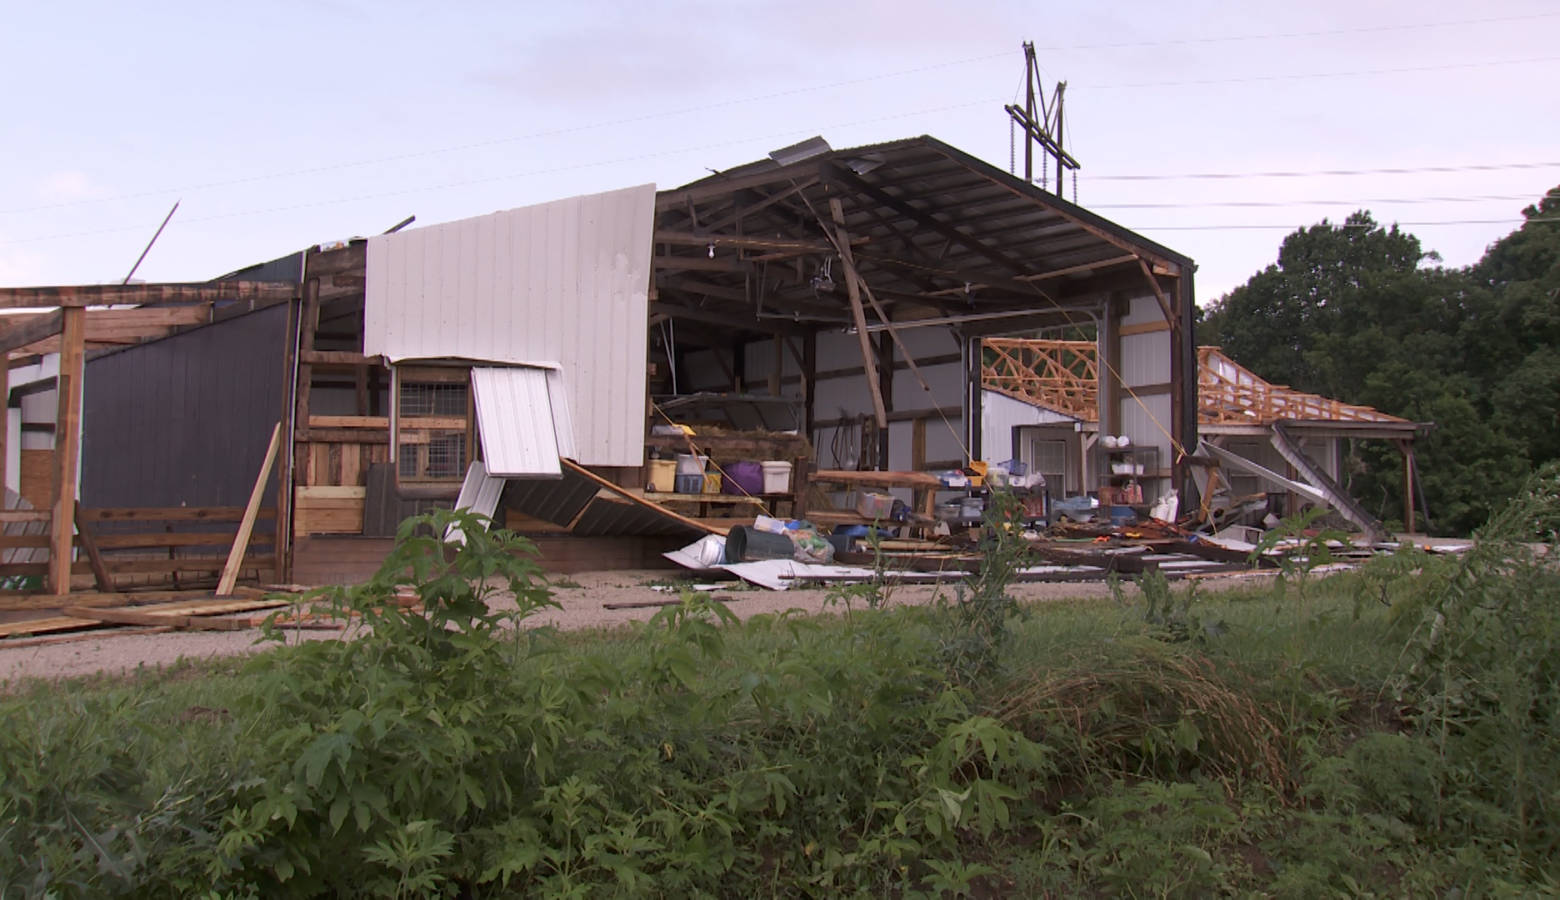 Like her home, Sue Stolz's barn was severely damaged in the tornado (Seth Tackett/WTIU)